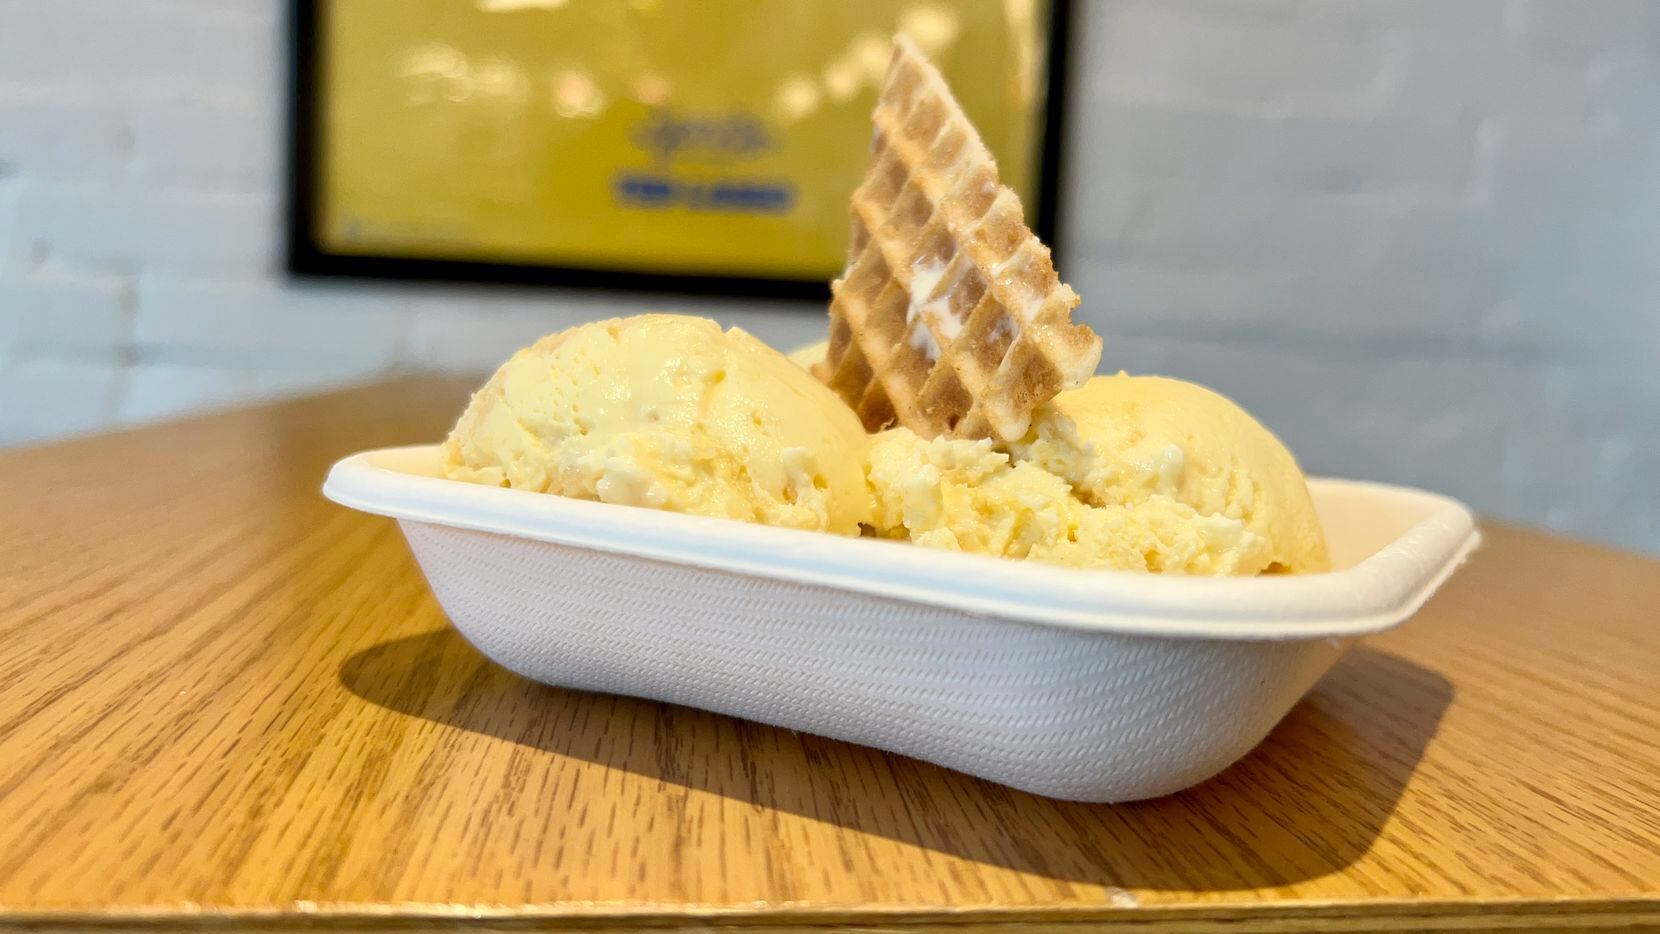 Jeni's Splendid Ice Creams started selling a new shortbread-based ice cream called Biscuits...